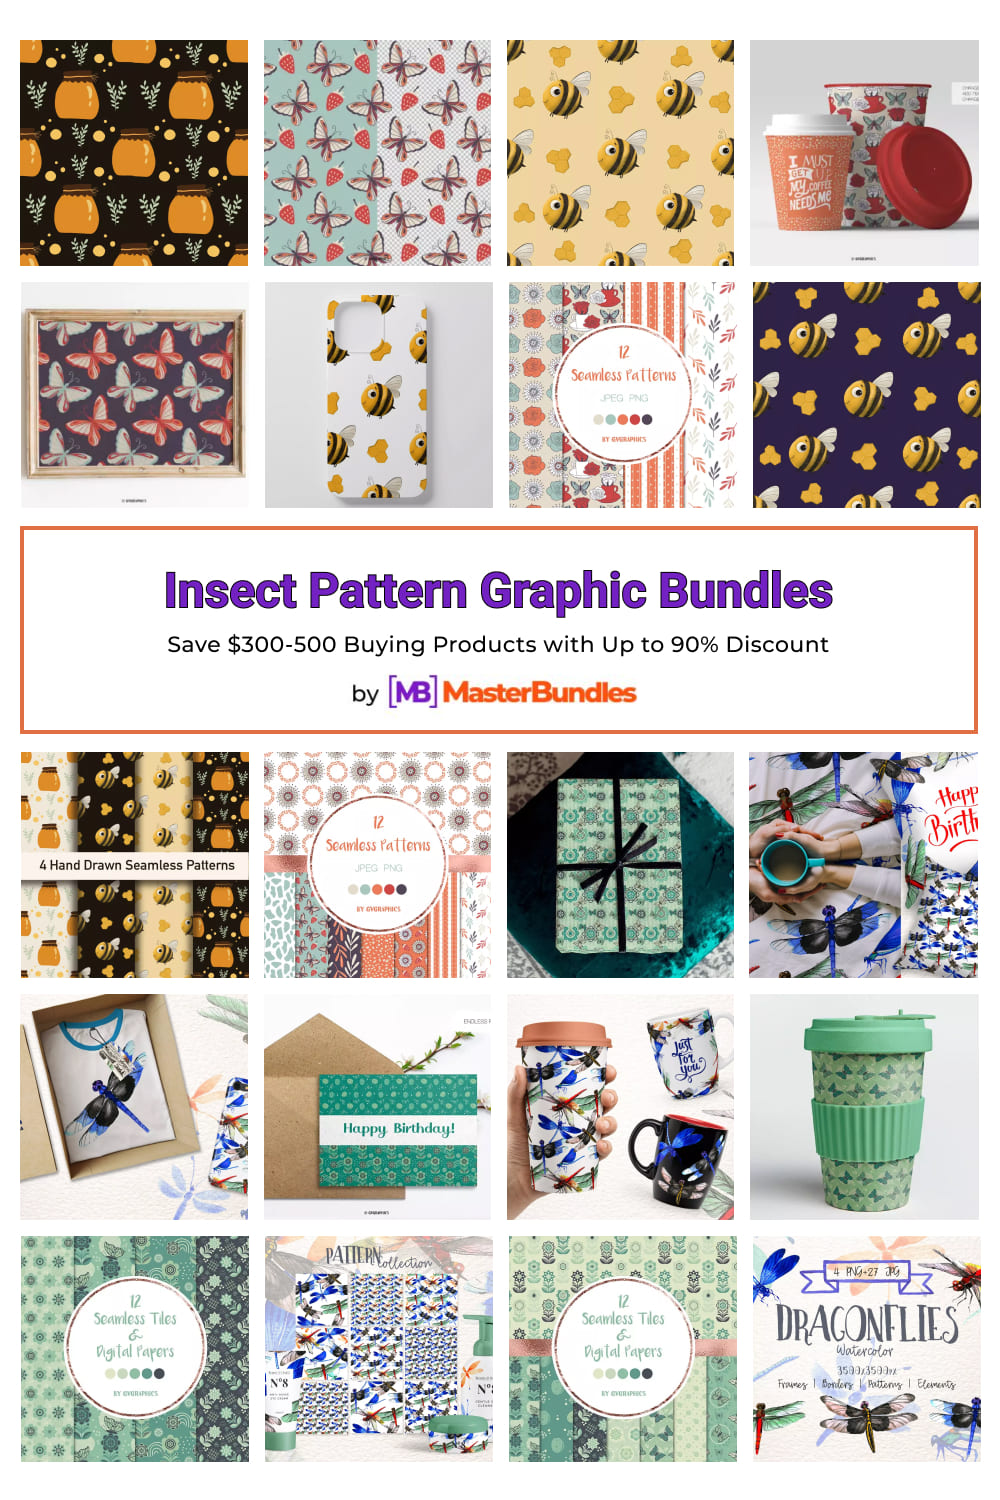 Insect Pattern Graphic Bundles for pinterest.